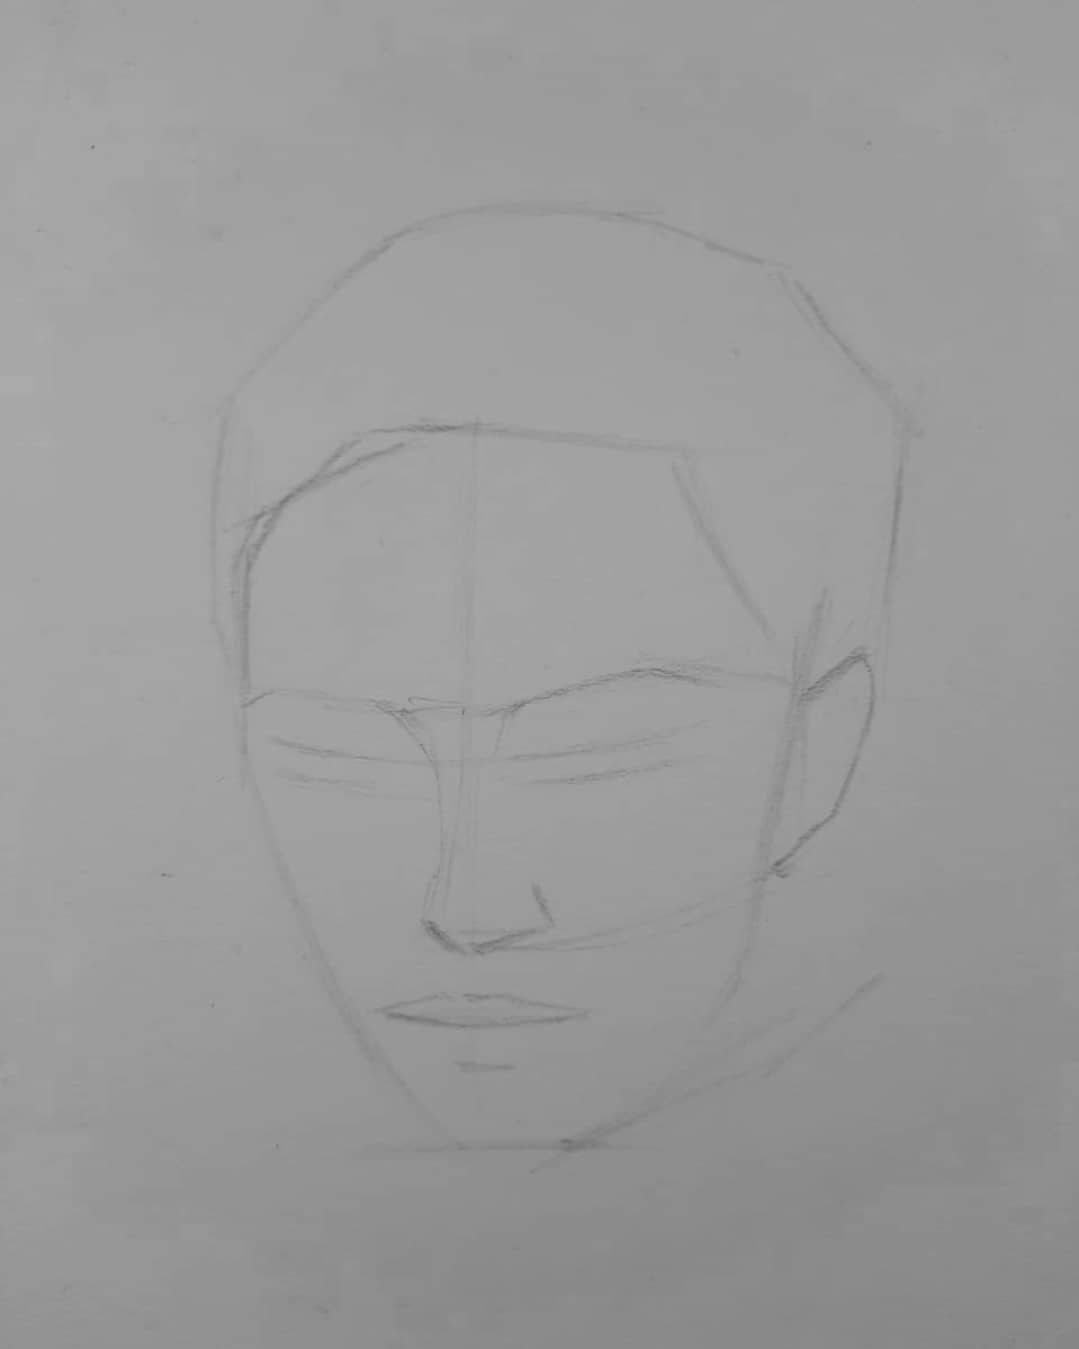 Learn to Draw a Face with Simple Step 1